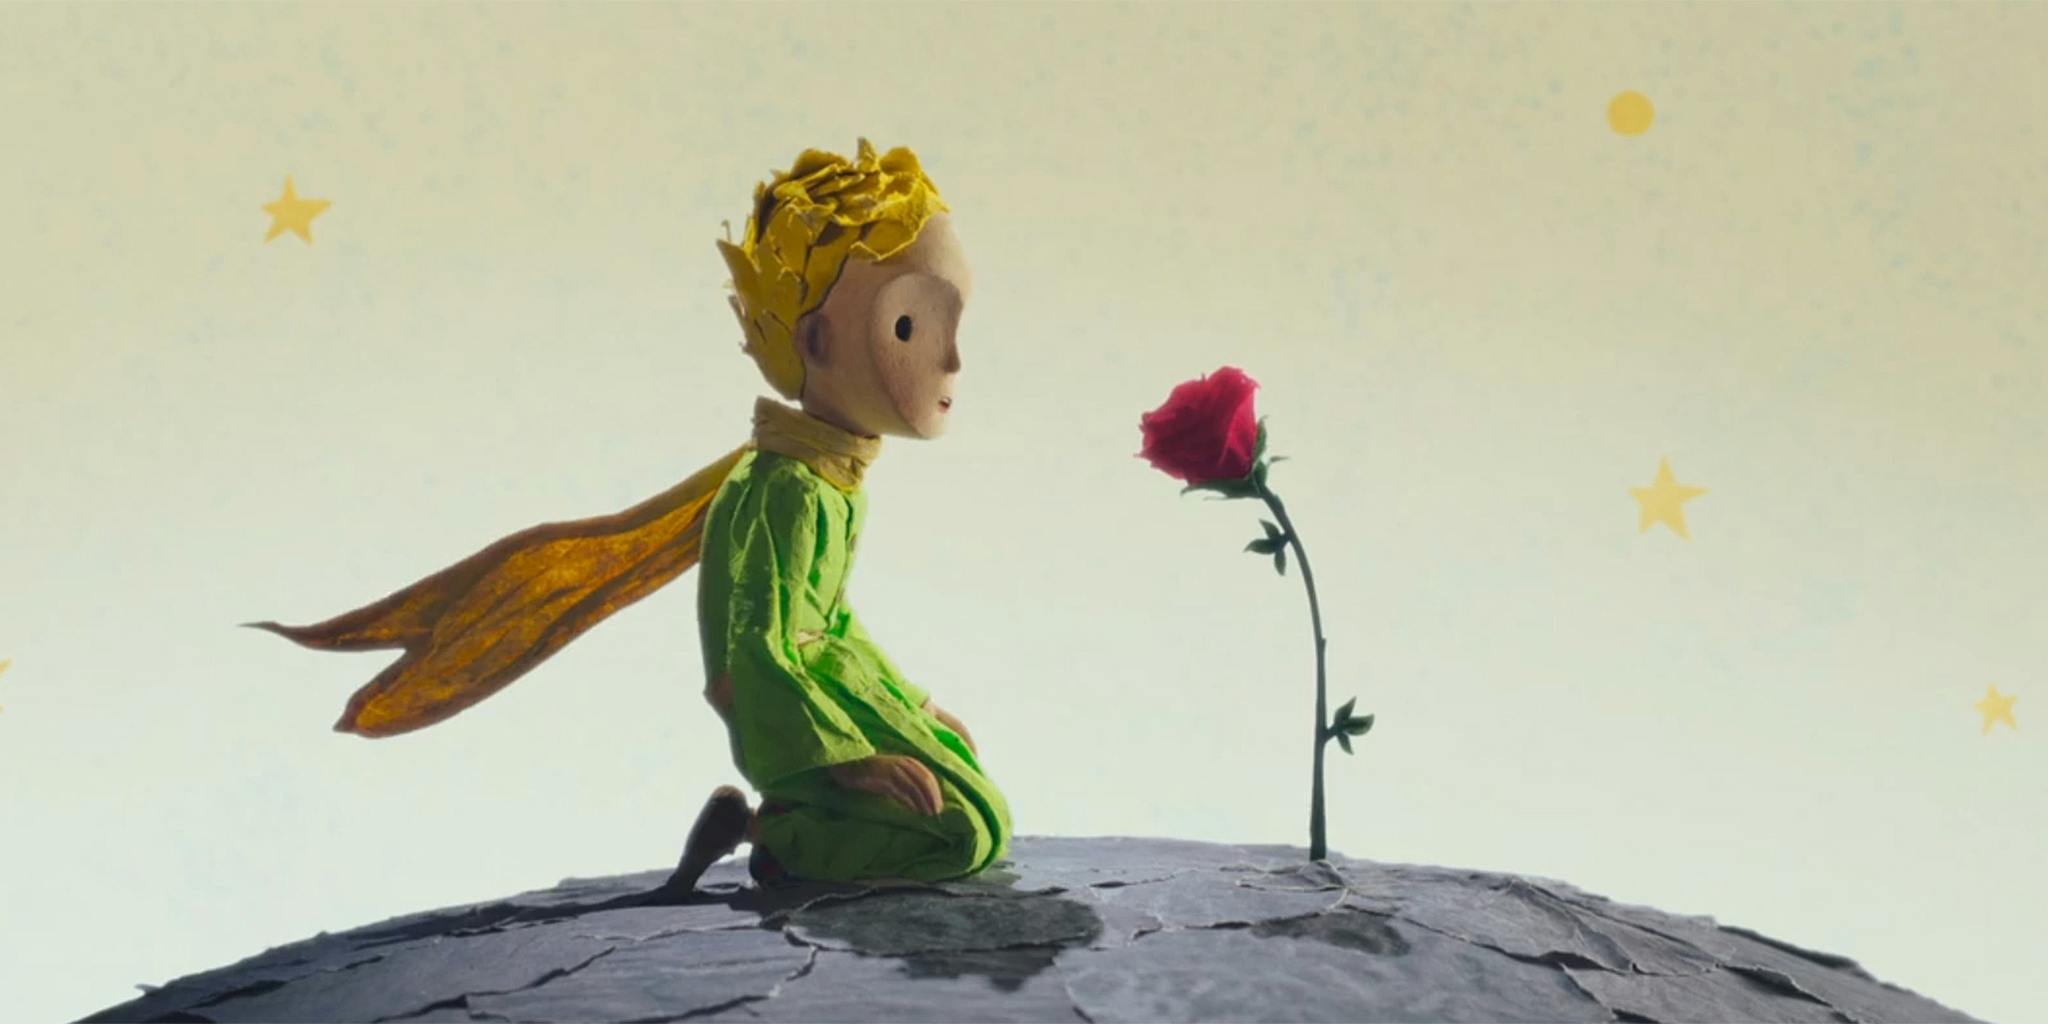 The Little Prince review – charming story encumbered by Netflix update, Animation in film